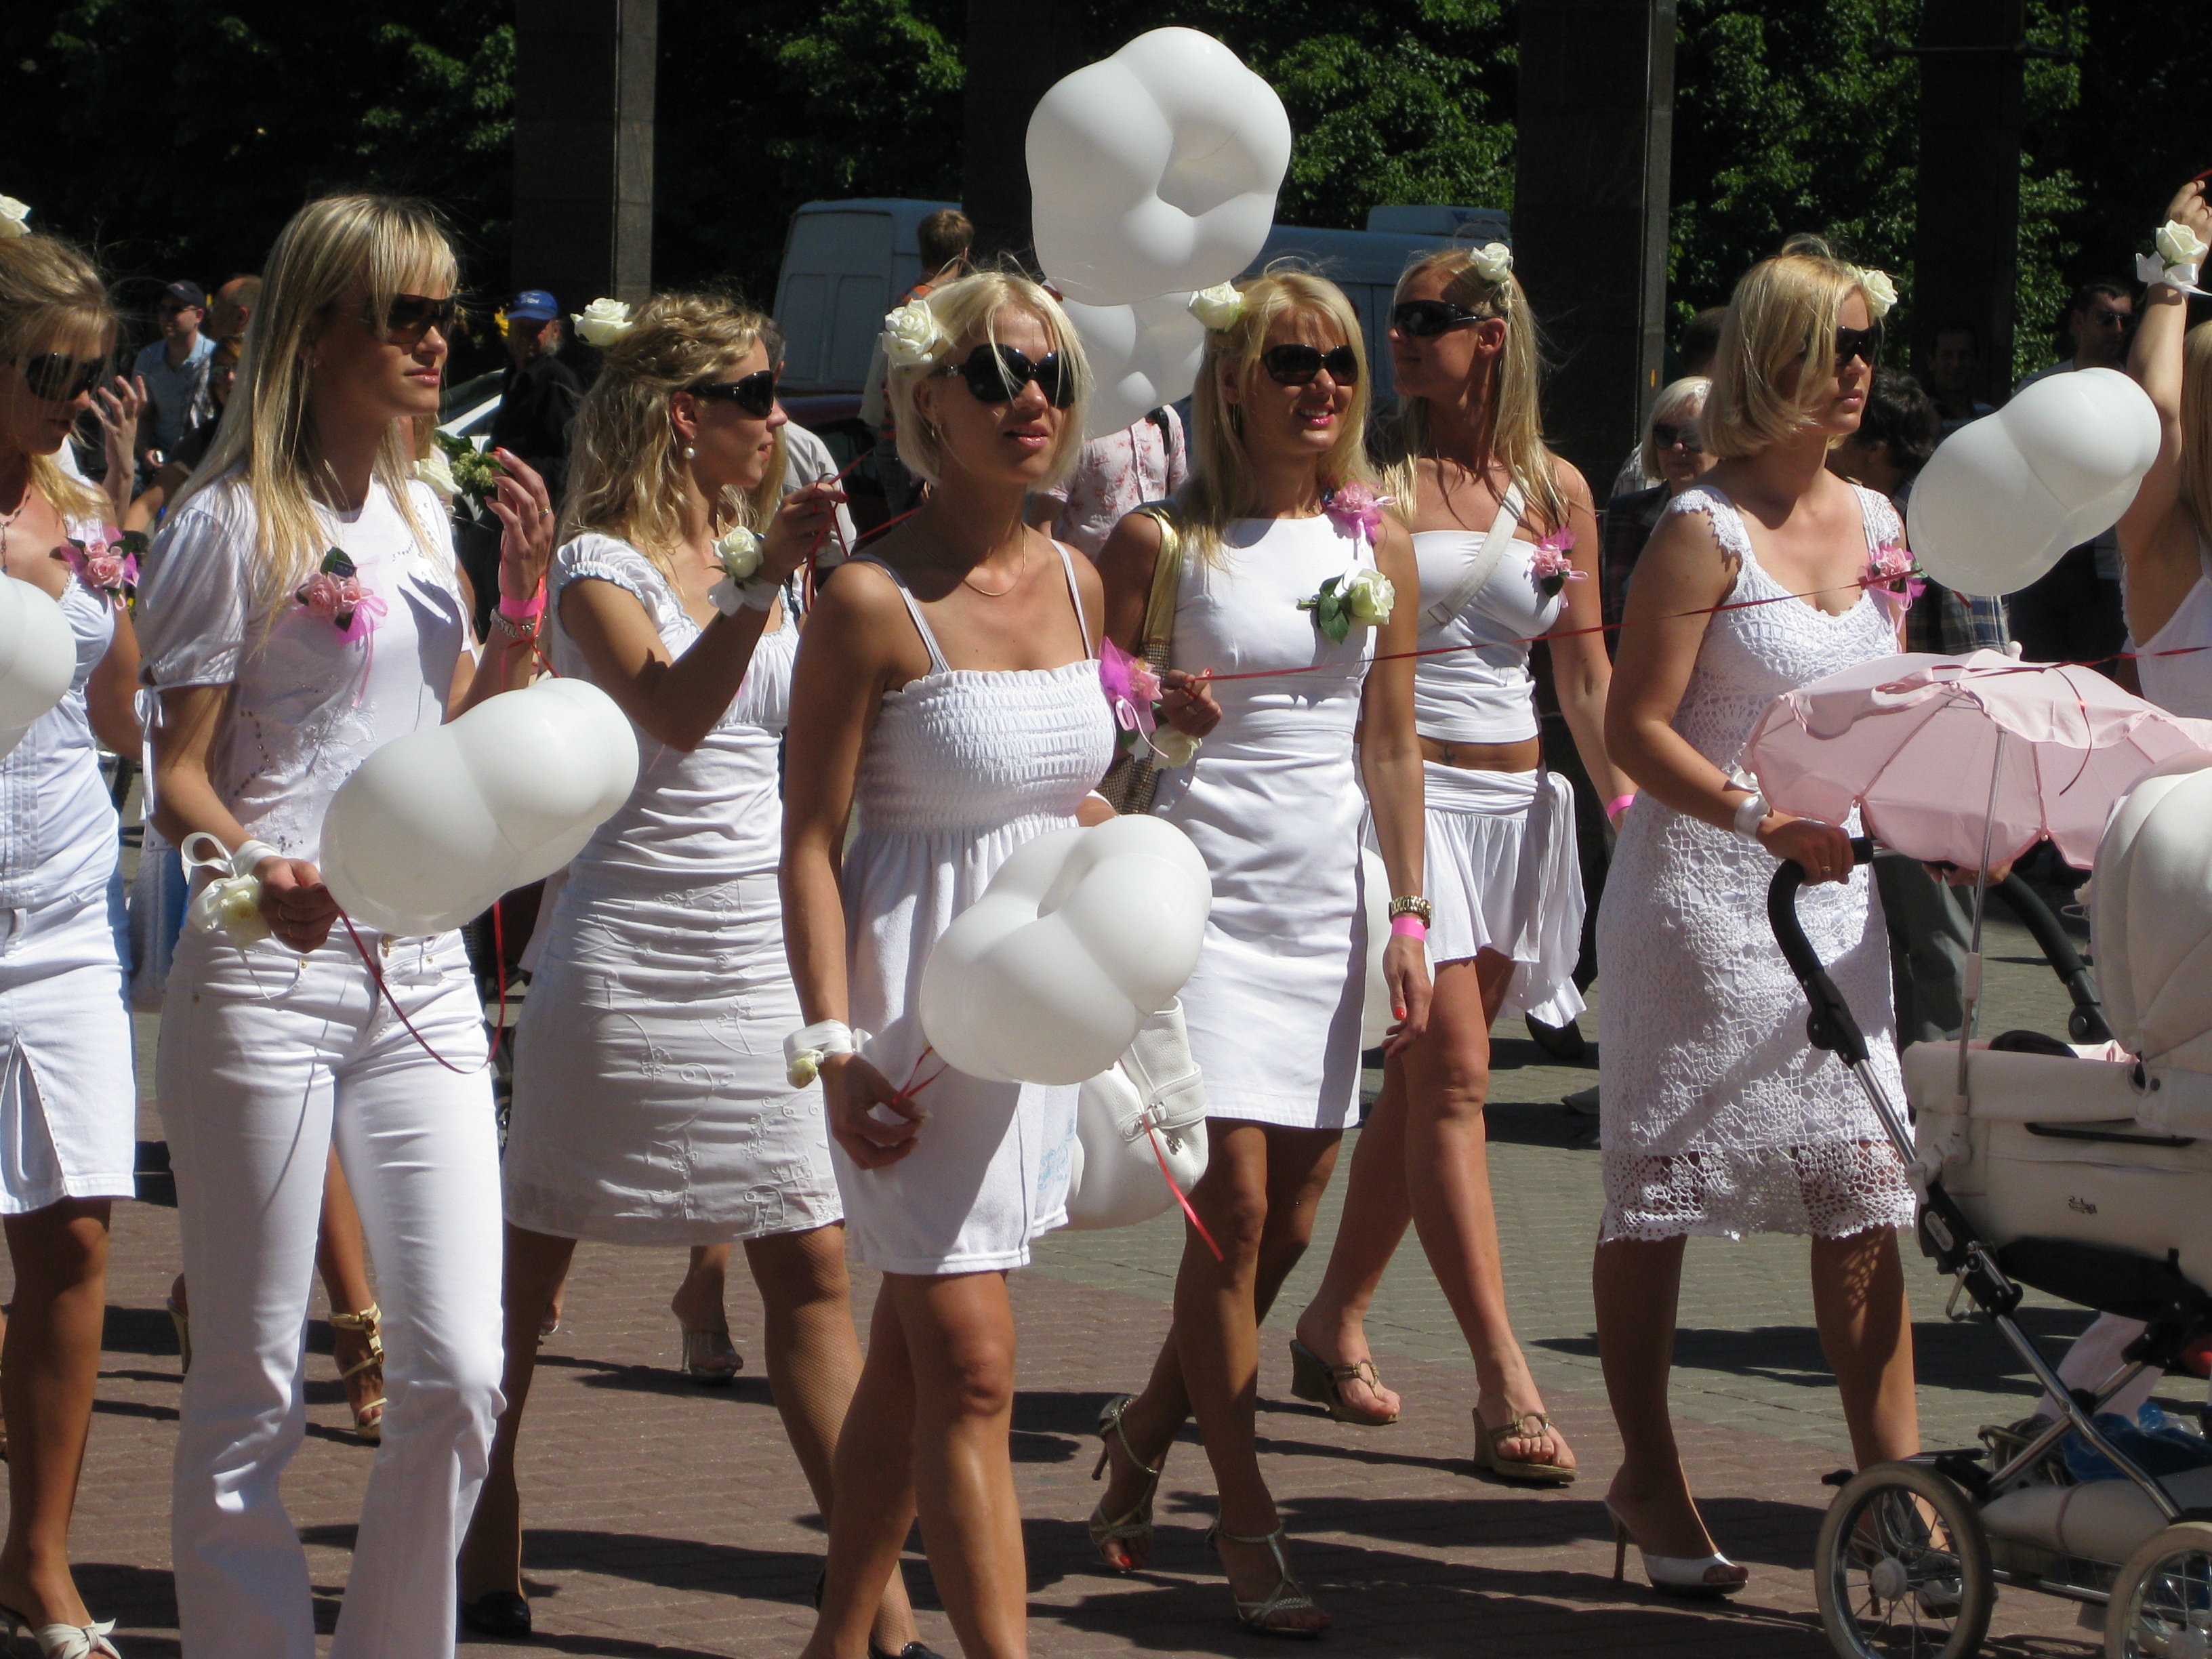 Blonde Parade To Beat Recession In Latvia